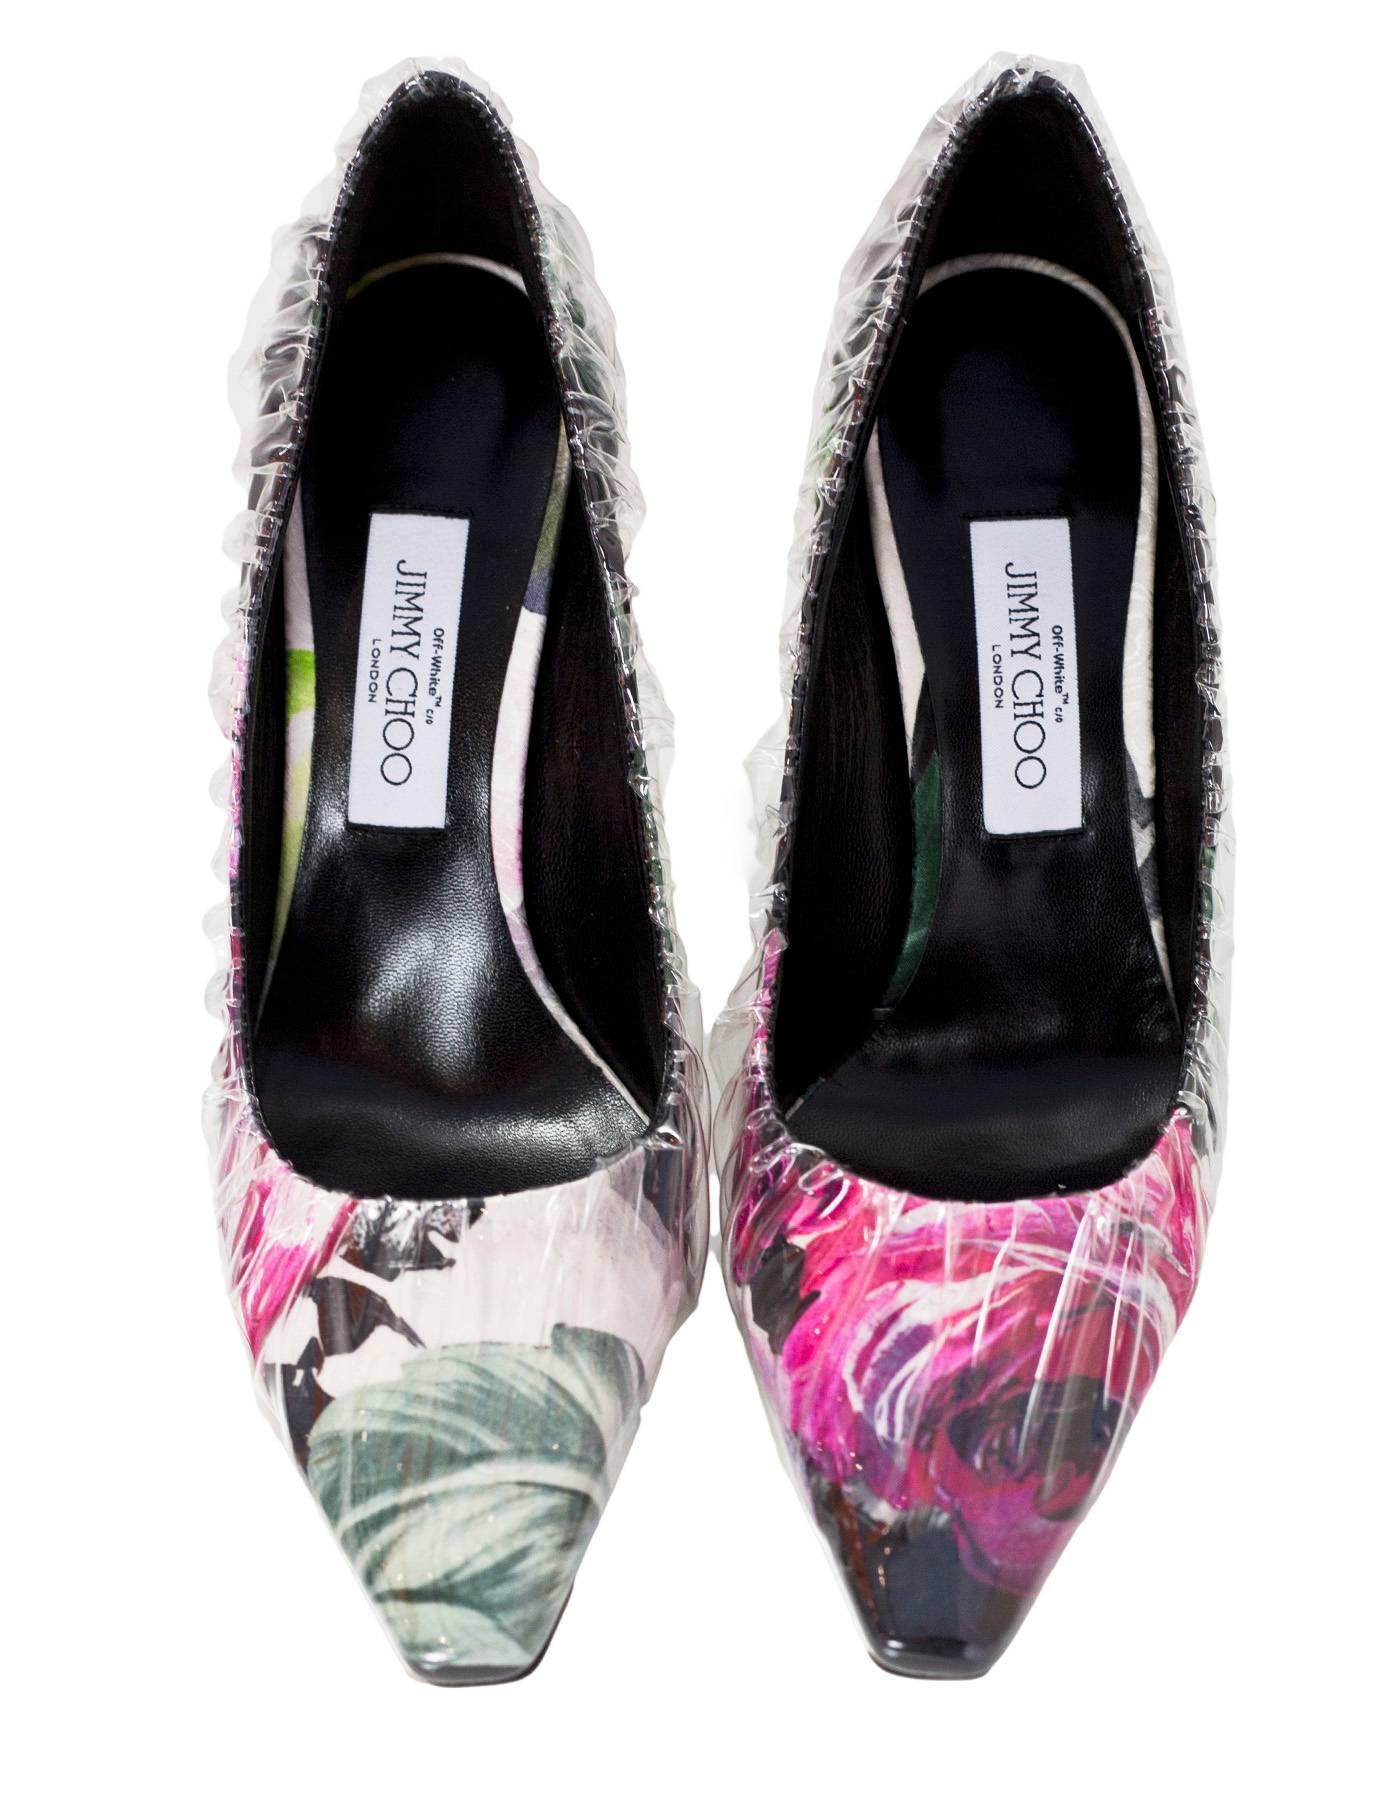 jimmy choo floral shoes